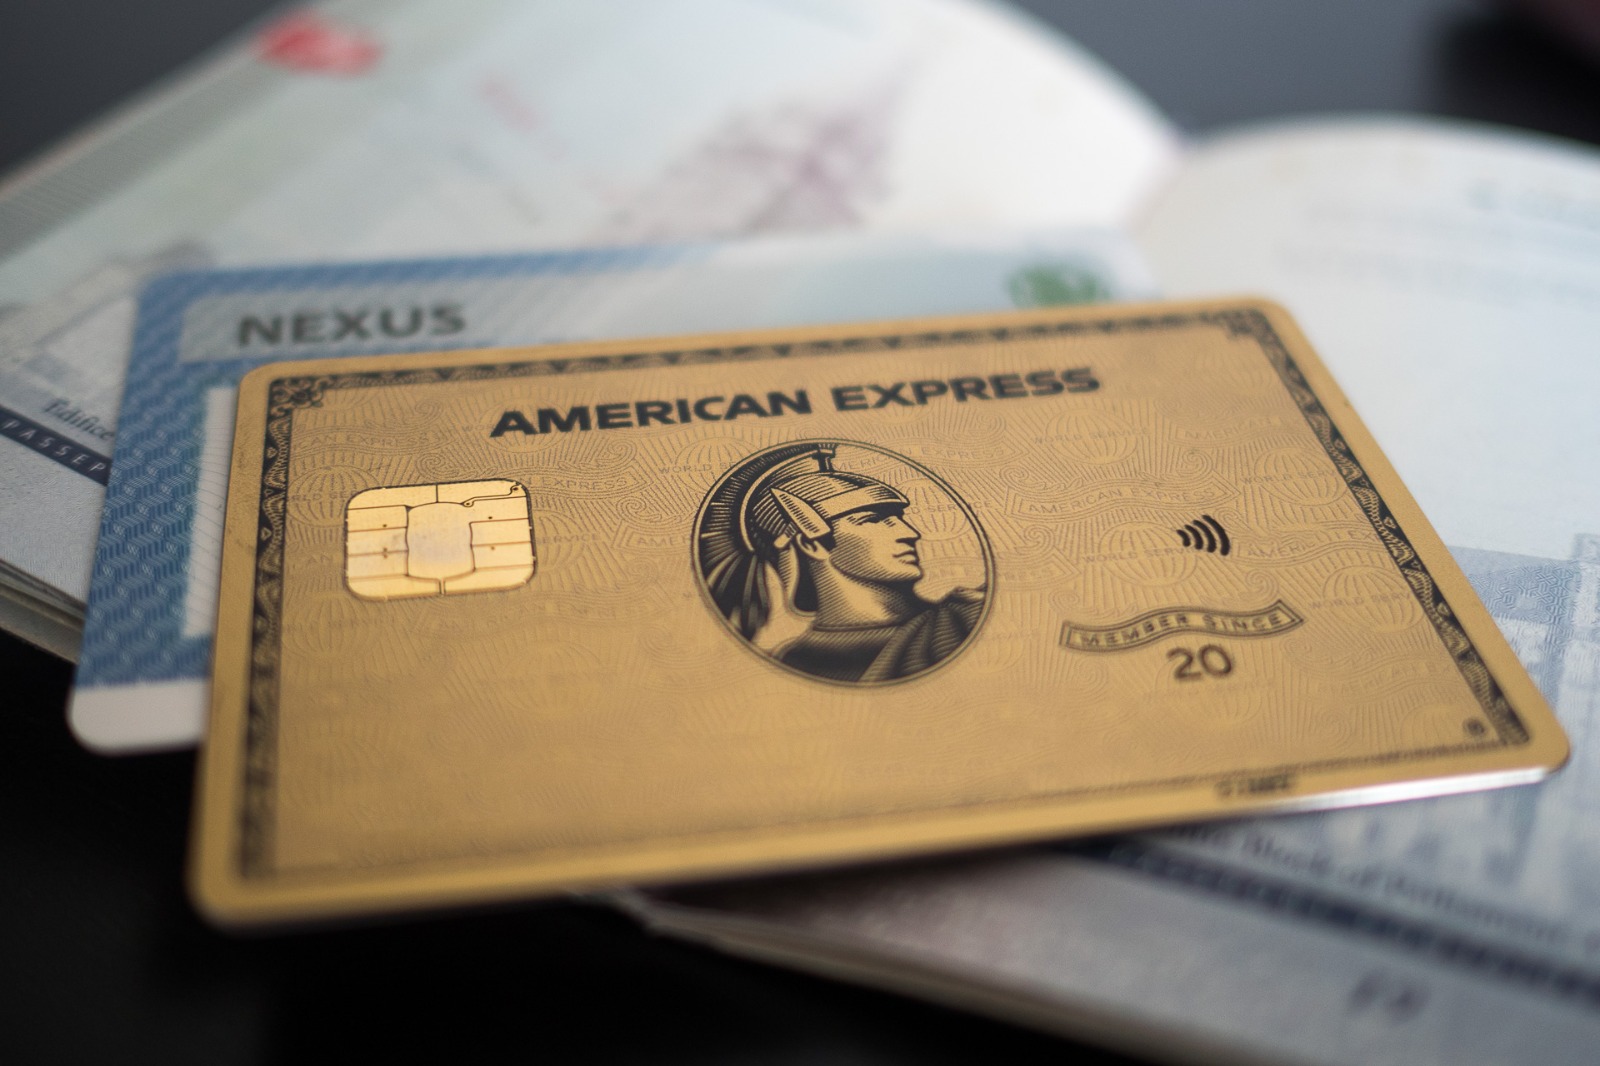 Amex Gold Rewards Card New Offer of 75,000 MR Points! Prince of Travel